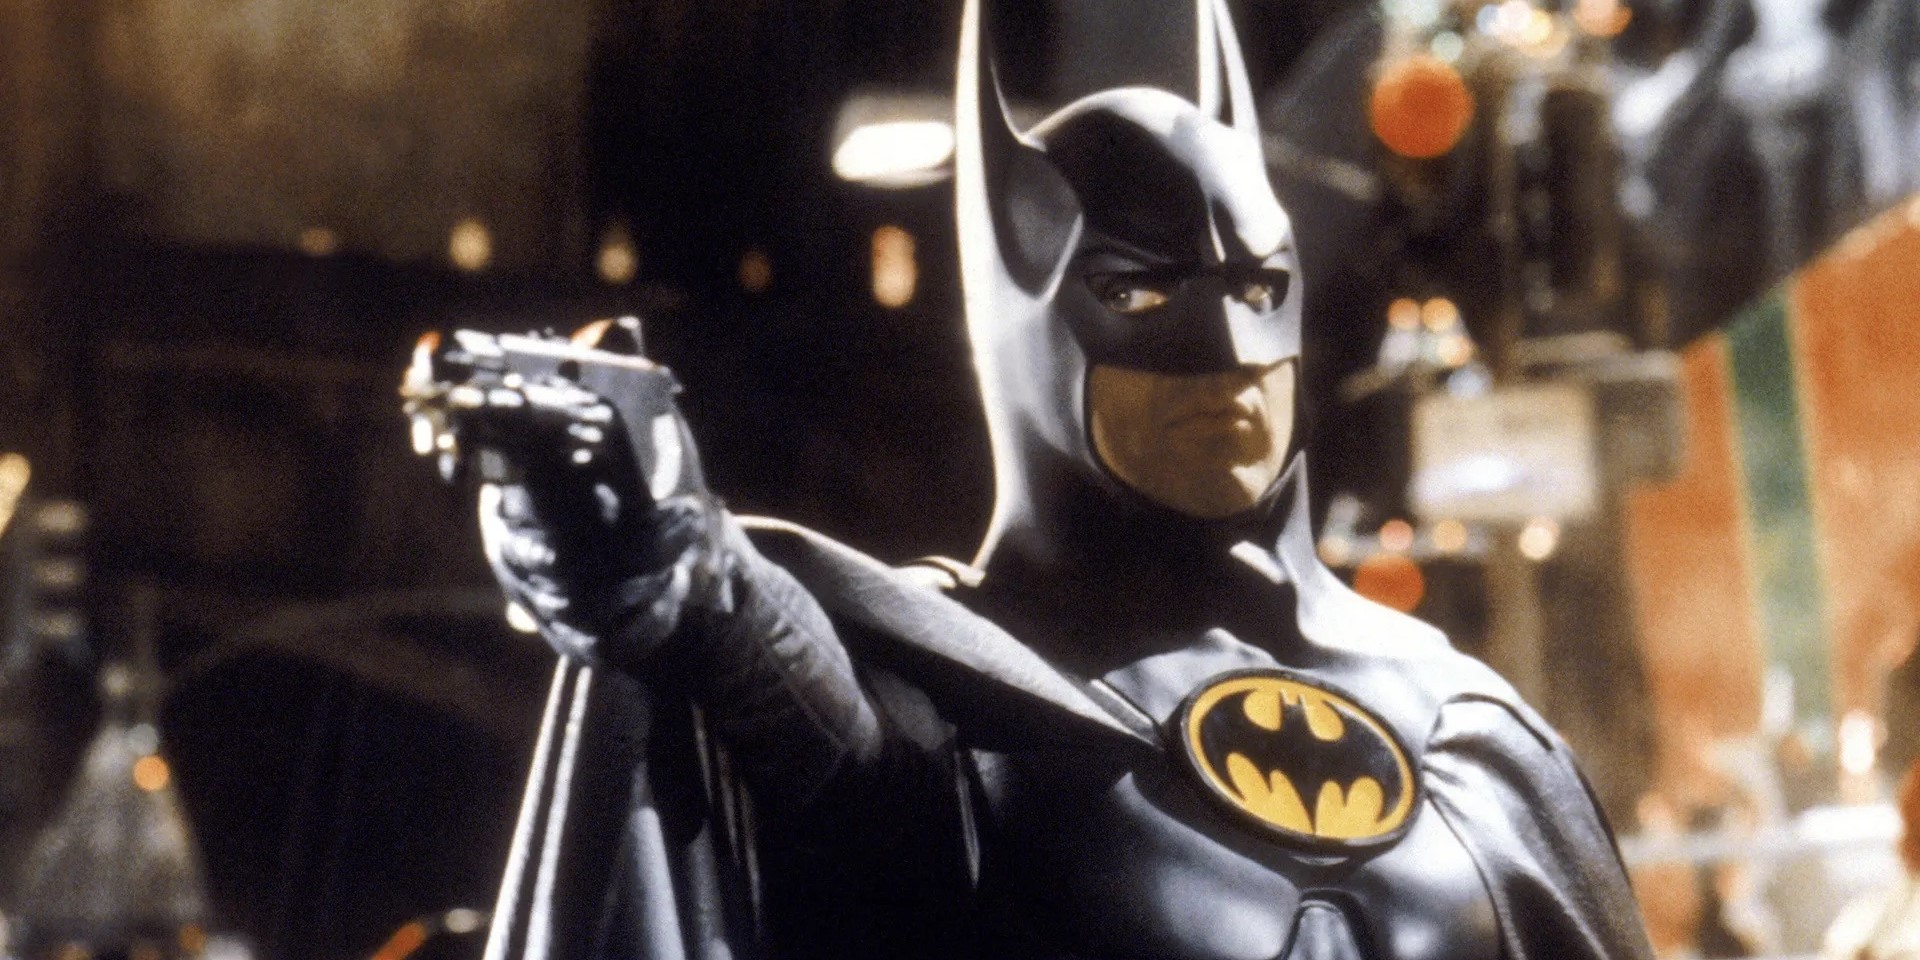 1989 Batman Movie Replica Grappling Gun Available From Sideshow